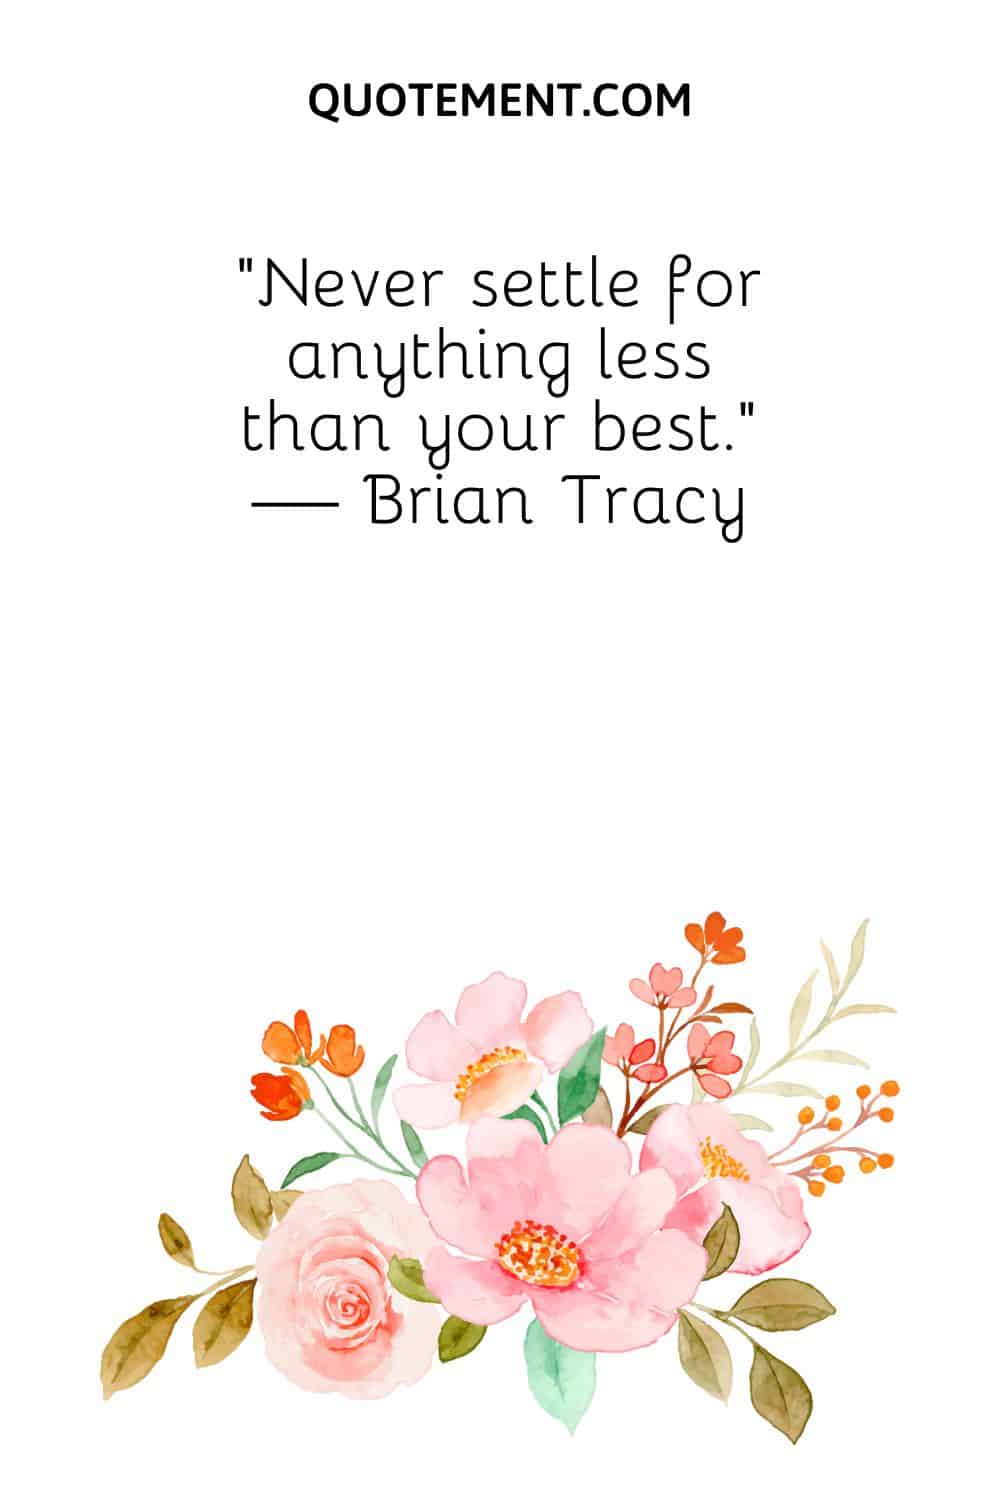 Never settle for anything less than your best